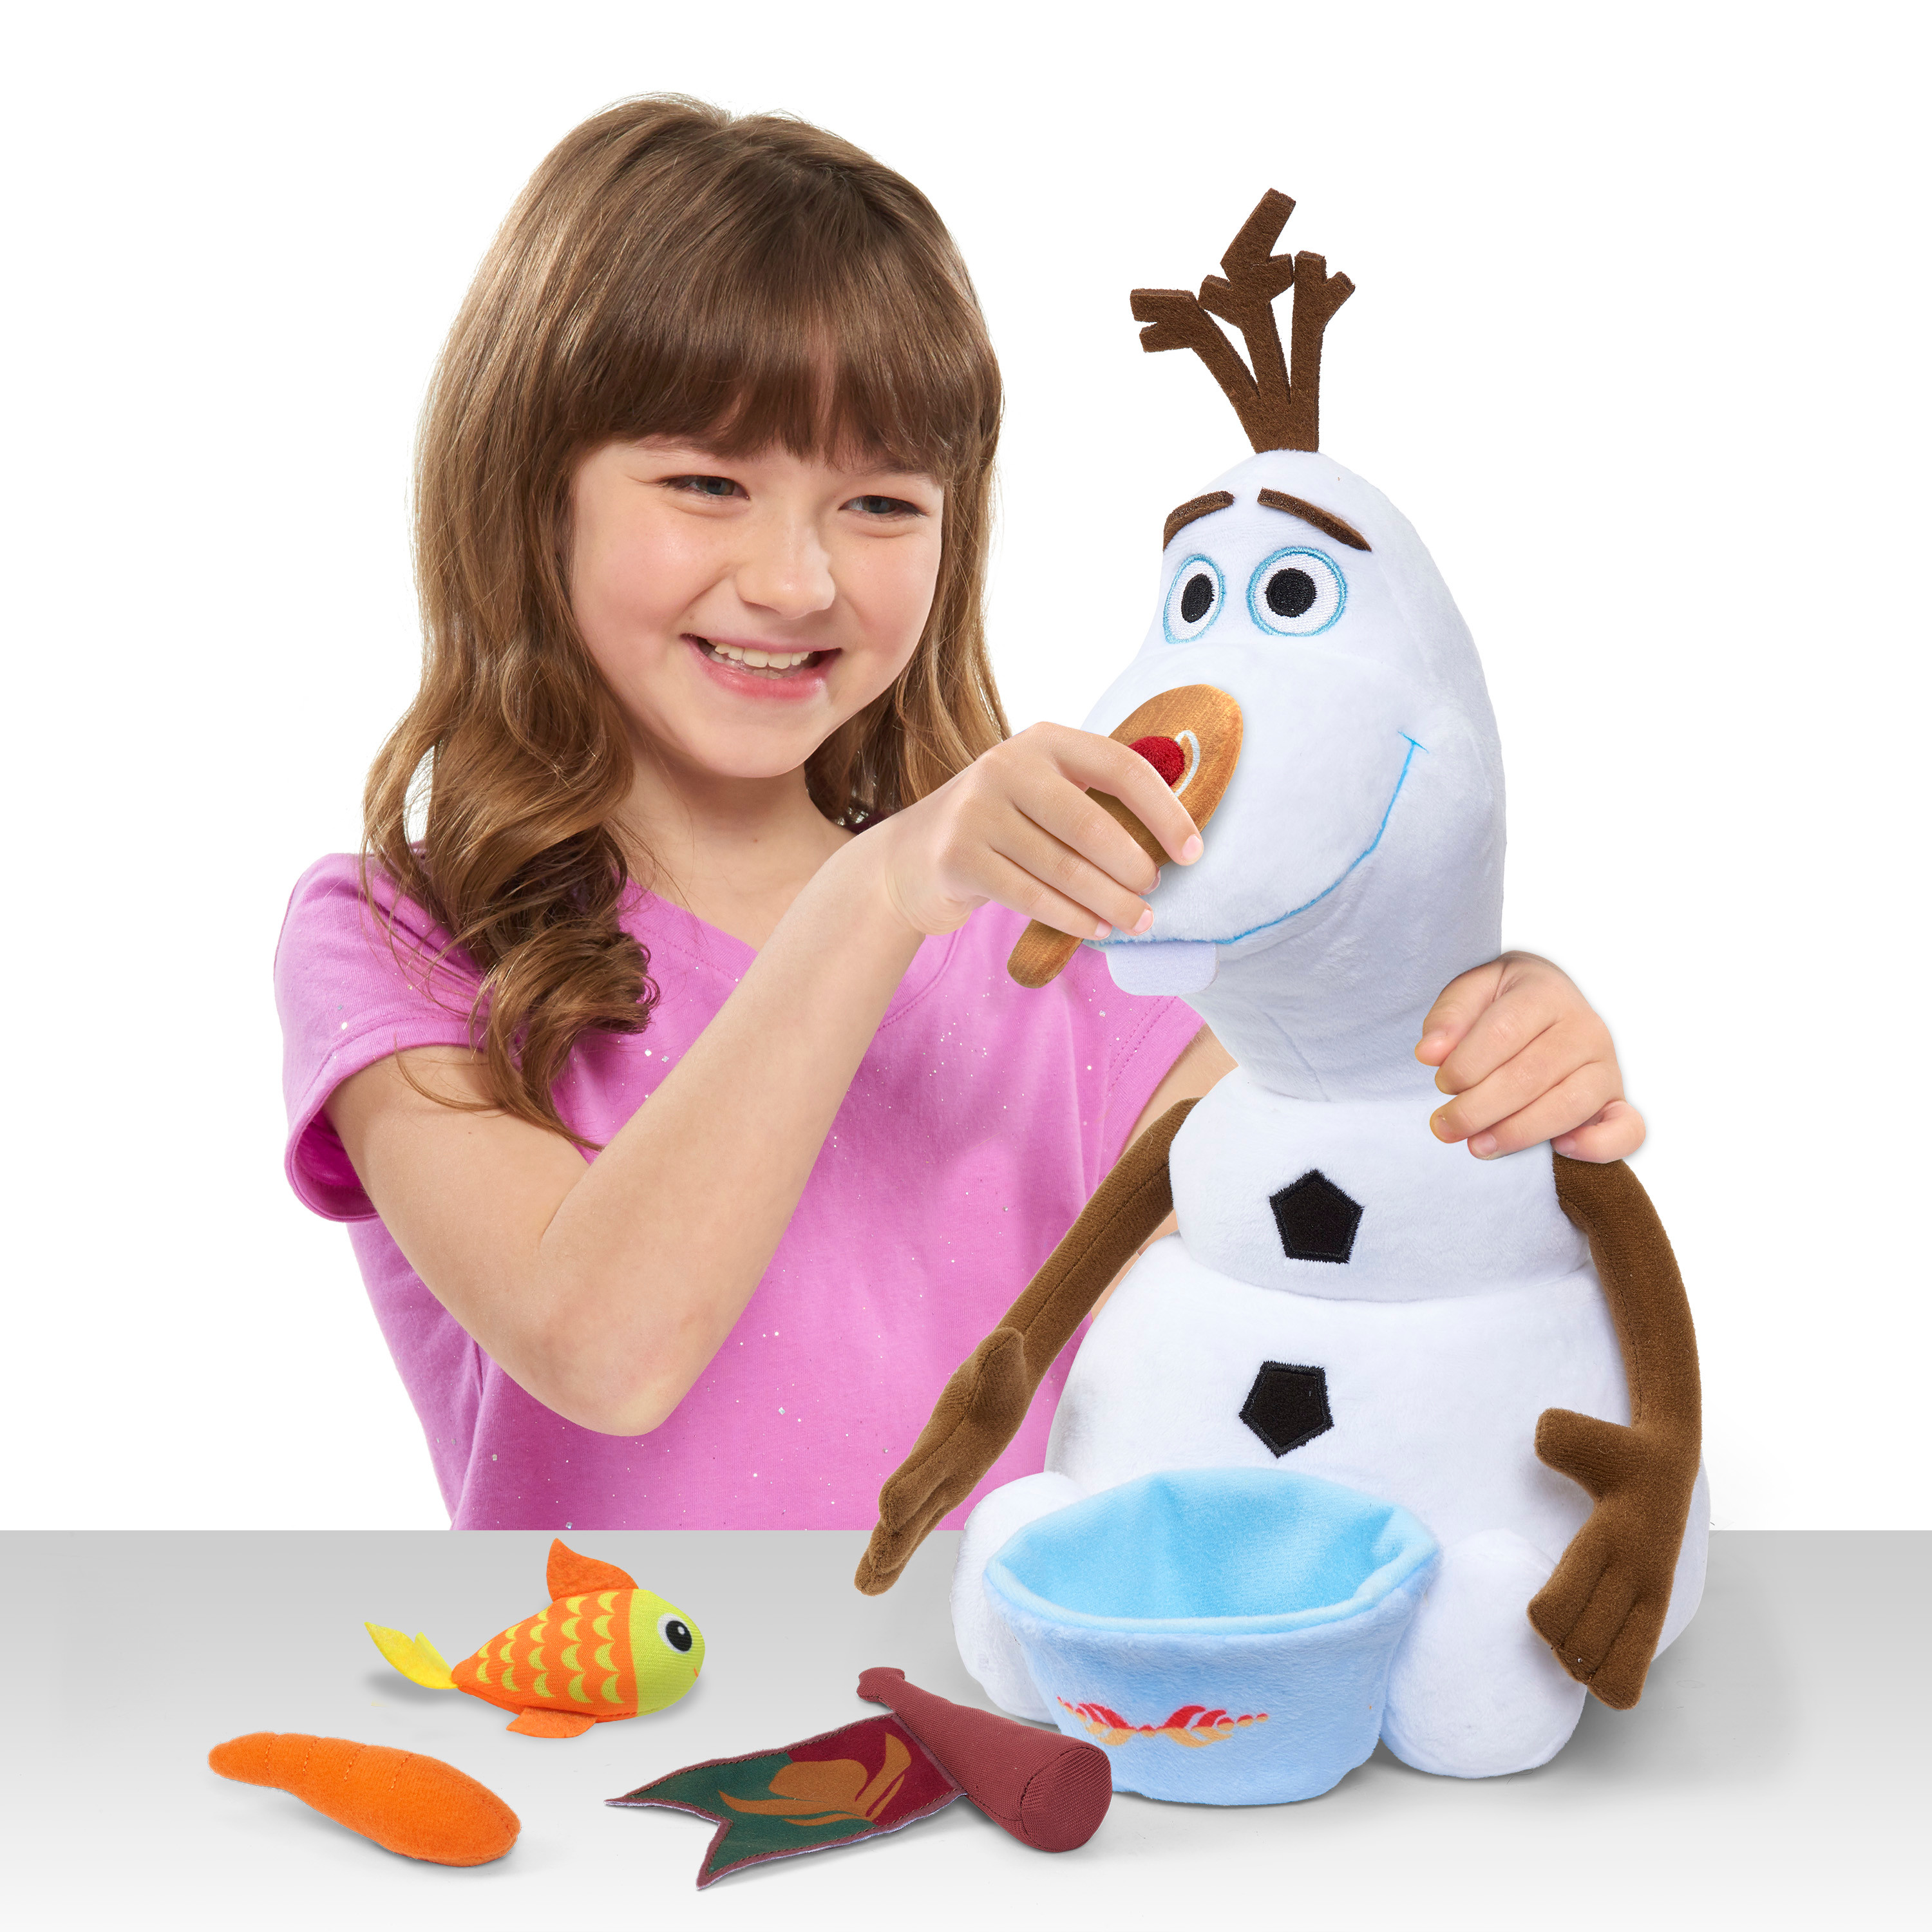 Disney Frozen Find My Nose 14-inch Olaf Plush, Officially Licensed Kids Toys for Ages 3 Up, Gifts and Presents - image 3 of 4